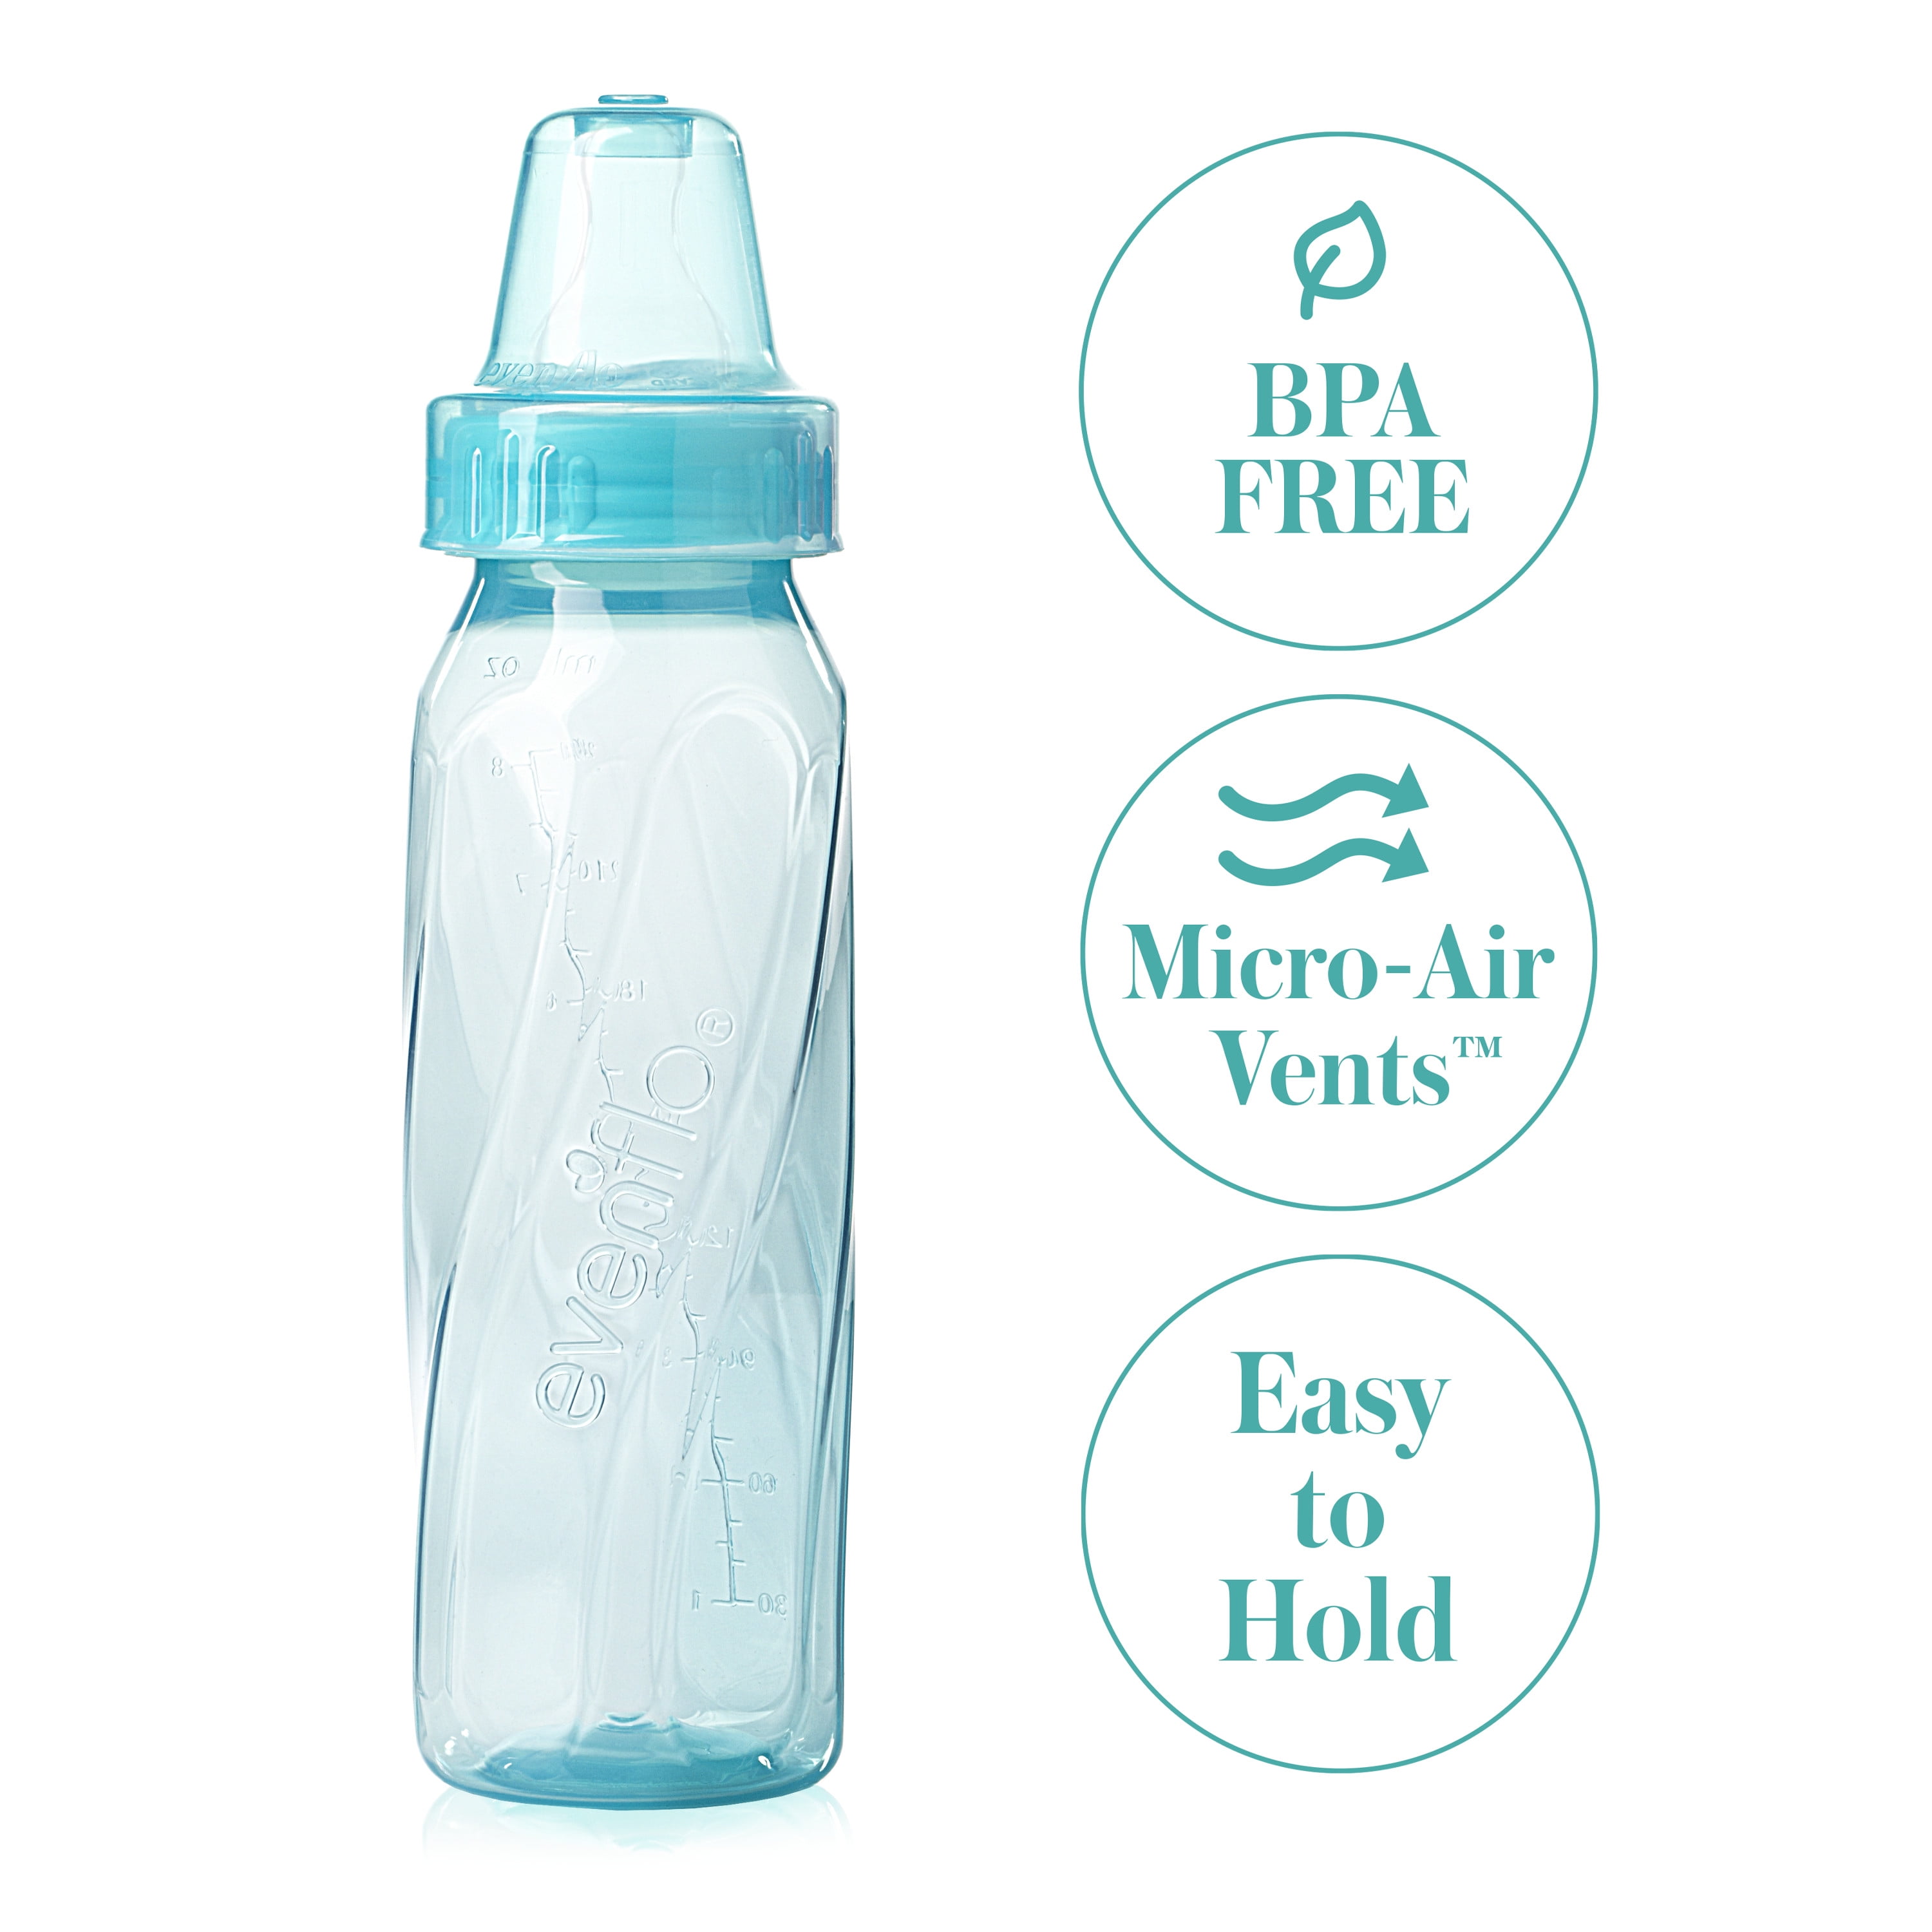 Evenflo Feeding Classic Tinted Plastic And Silicone Baby Bottles